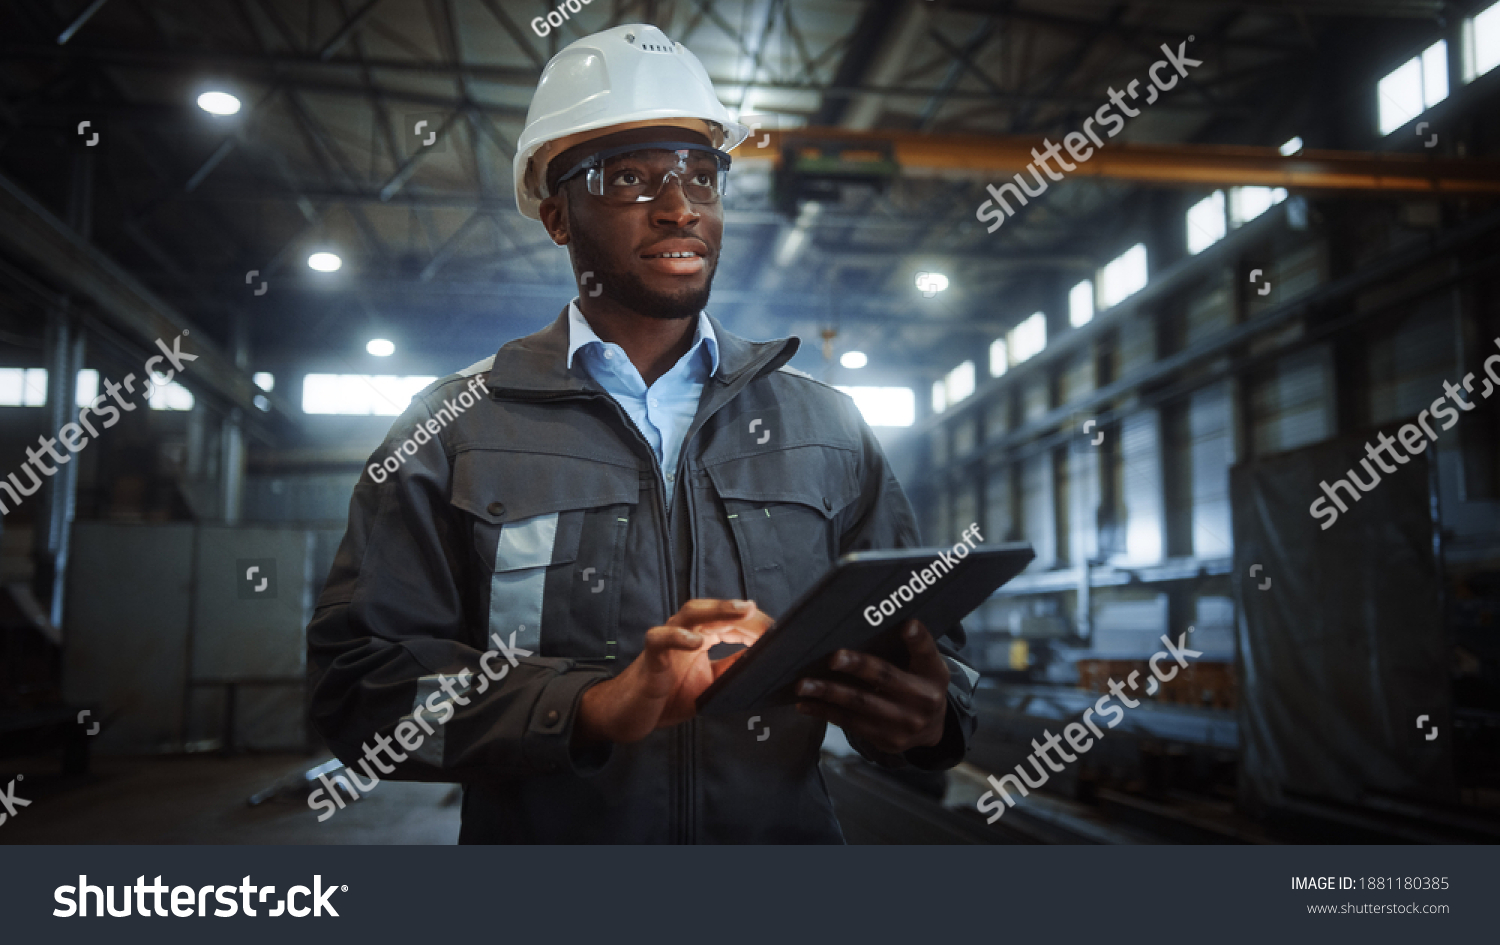 Professional Heavy Industry Engineer Worker Wearing Safety Uniform and Hard Hat Uses Tablet Computer. Smiling African American Industrial Specialist Walking in a Metal Construction Manufacture. #1881180385